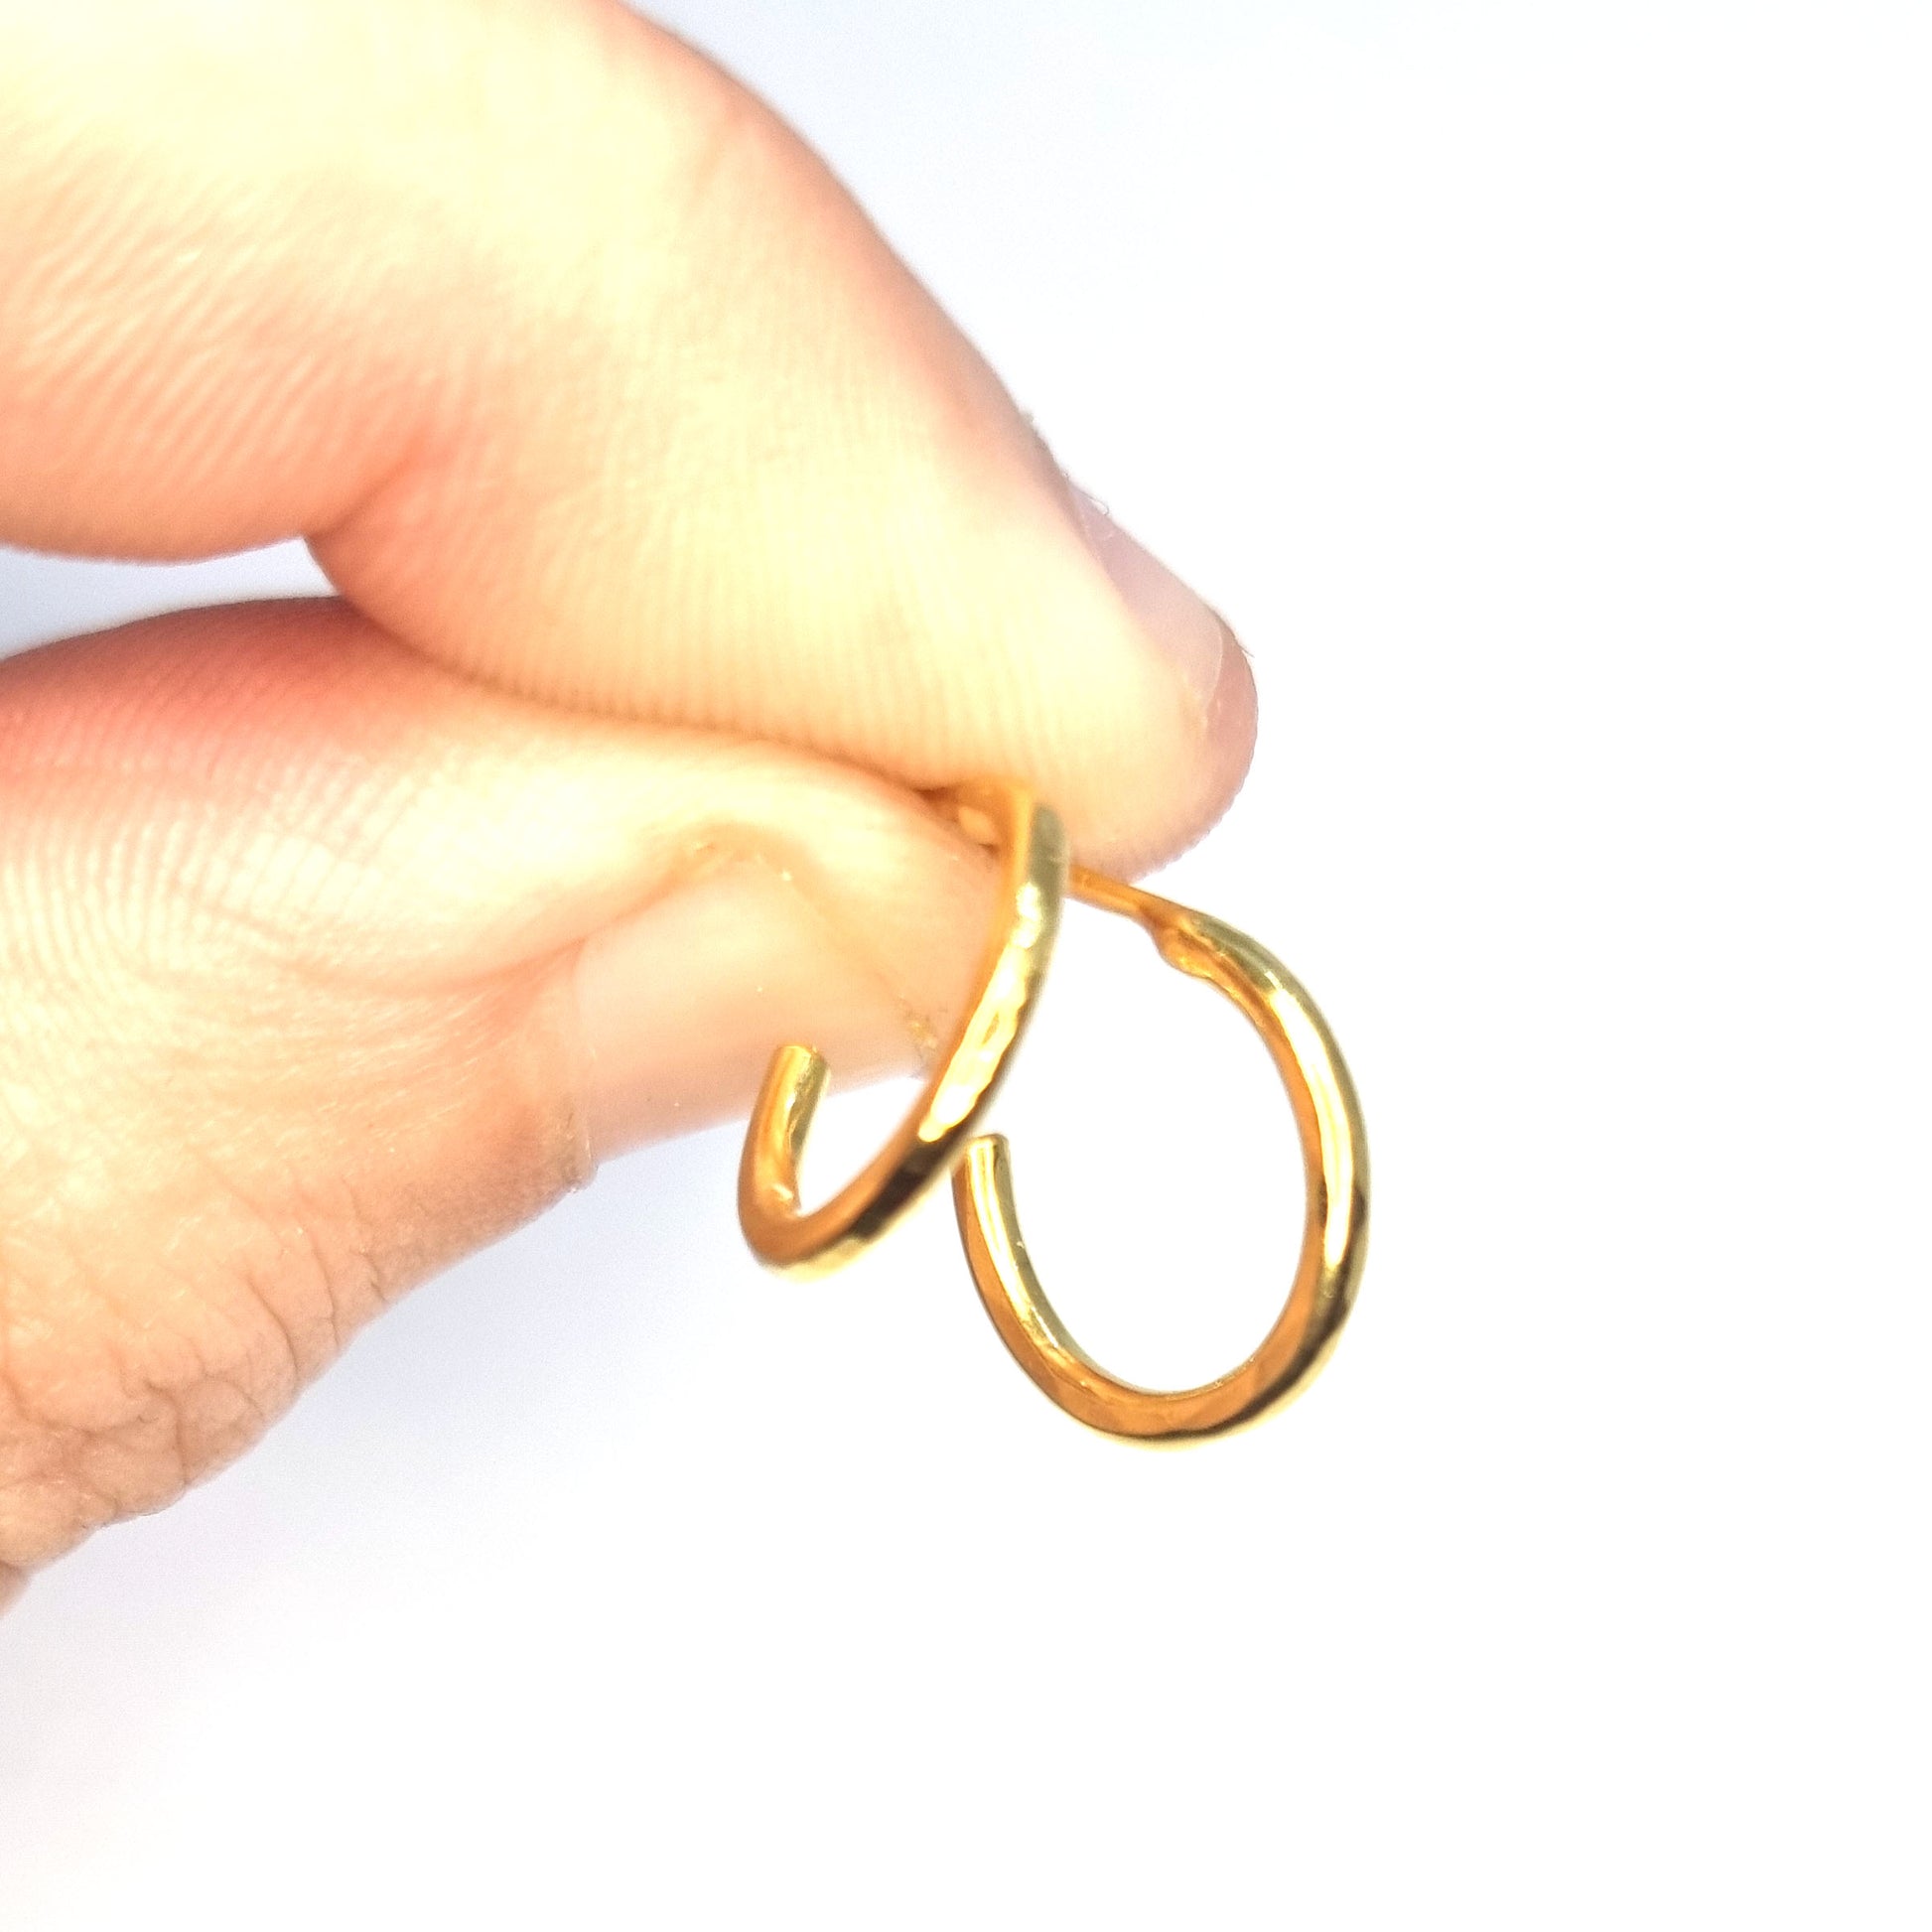 Yellow gold vermeil thin hammered hoop earrings, small. Pictured being held in a hand.